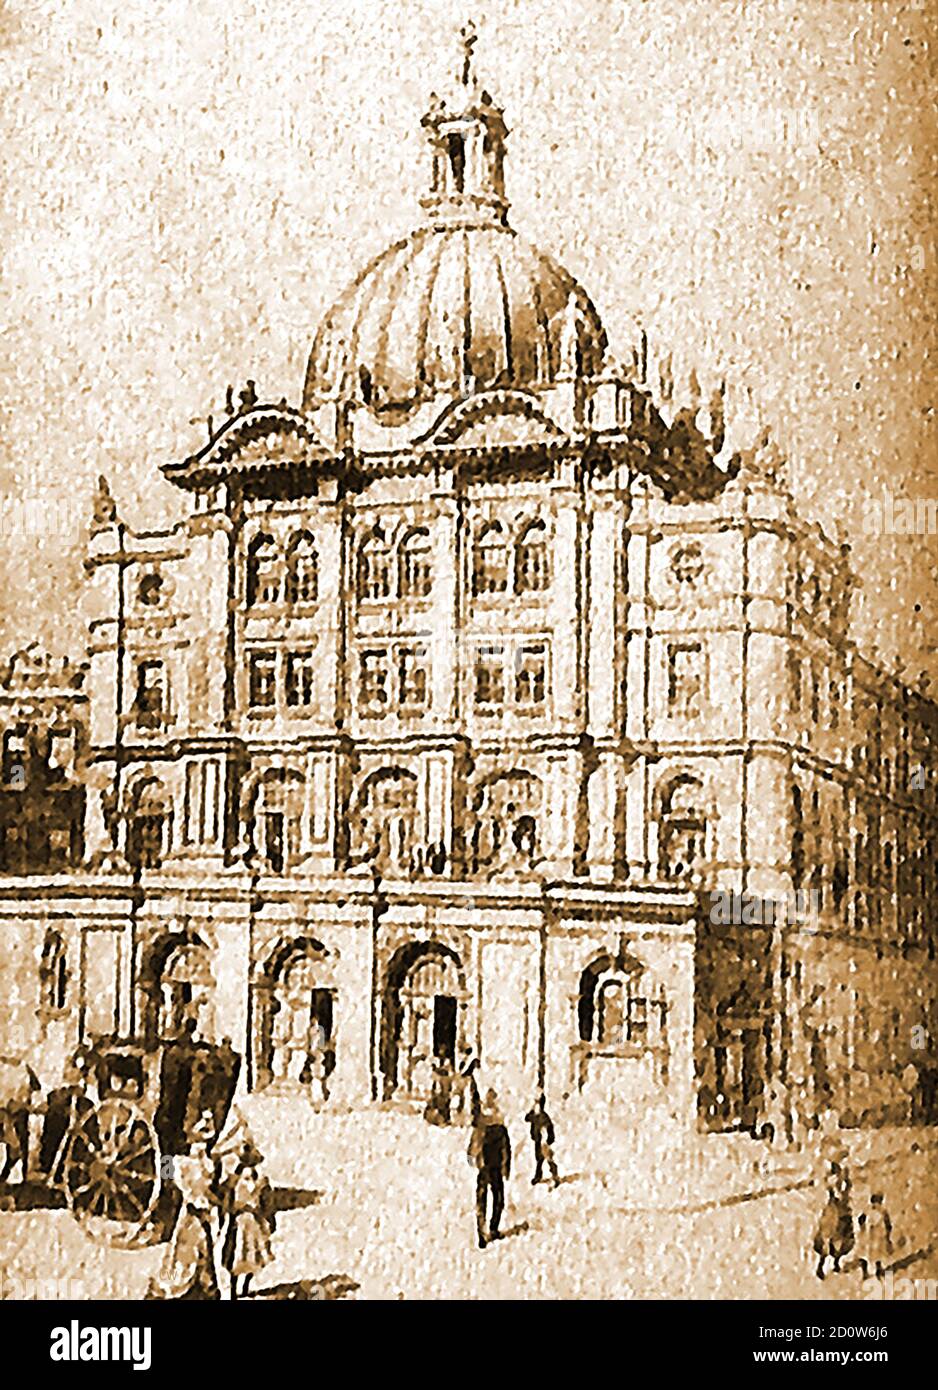 CAMDEN PALACE THEATRE, CAMDEN HIGH STREET, LONDON, ENGLAND -  An old image of the building shortly after opening. It had been  formally opened by the actress Ellen Terry on Boxing Day 1900    as the Royal Camden Theatre to show a wide range of productions ranging from Shakespeare to opera, musical comedy and pantomime. It later became a bbc recording studio,a cinema , a musical theatre and a night club. A large fire at the building during renovation work occured on the  6th January 2020 when eight fire engines and around 60 firefighters attended to contain the fire in the roof area. Stock Photo